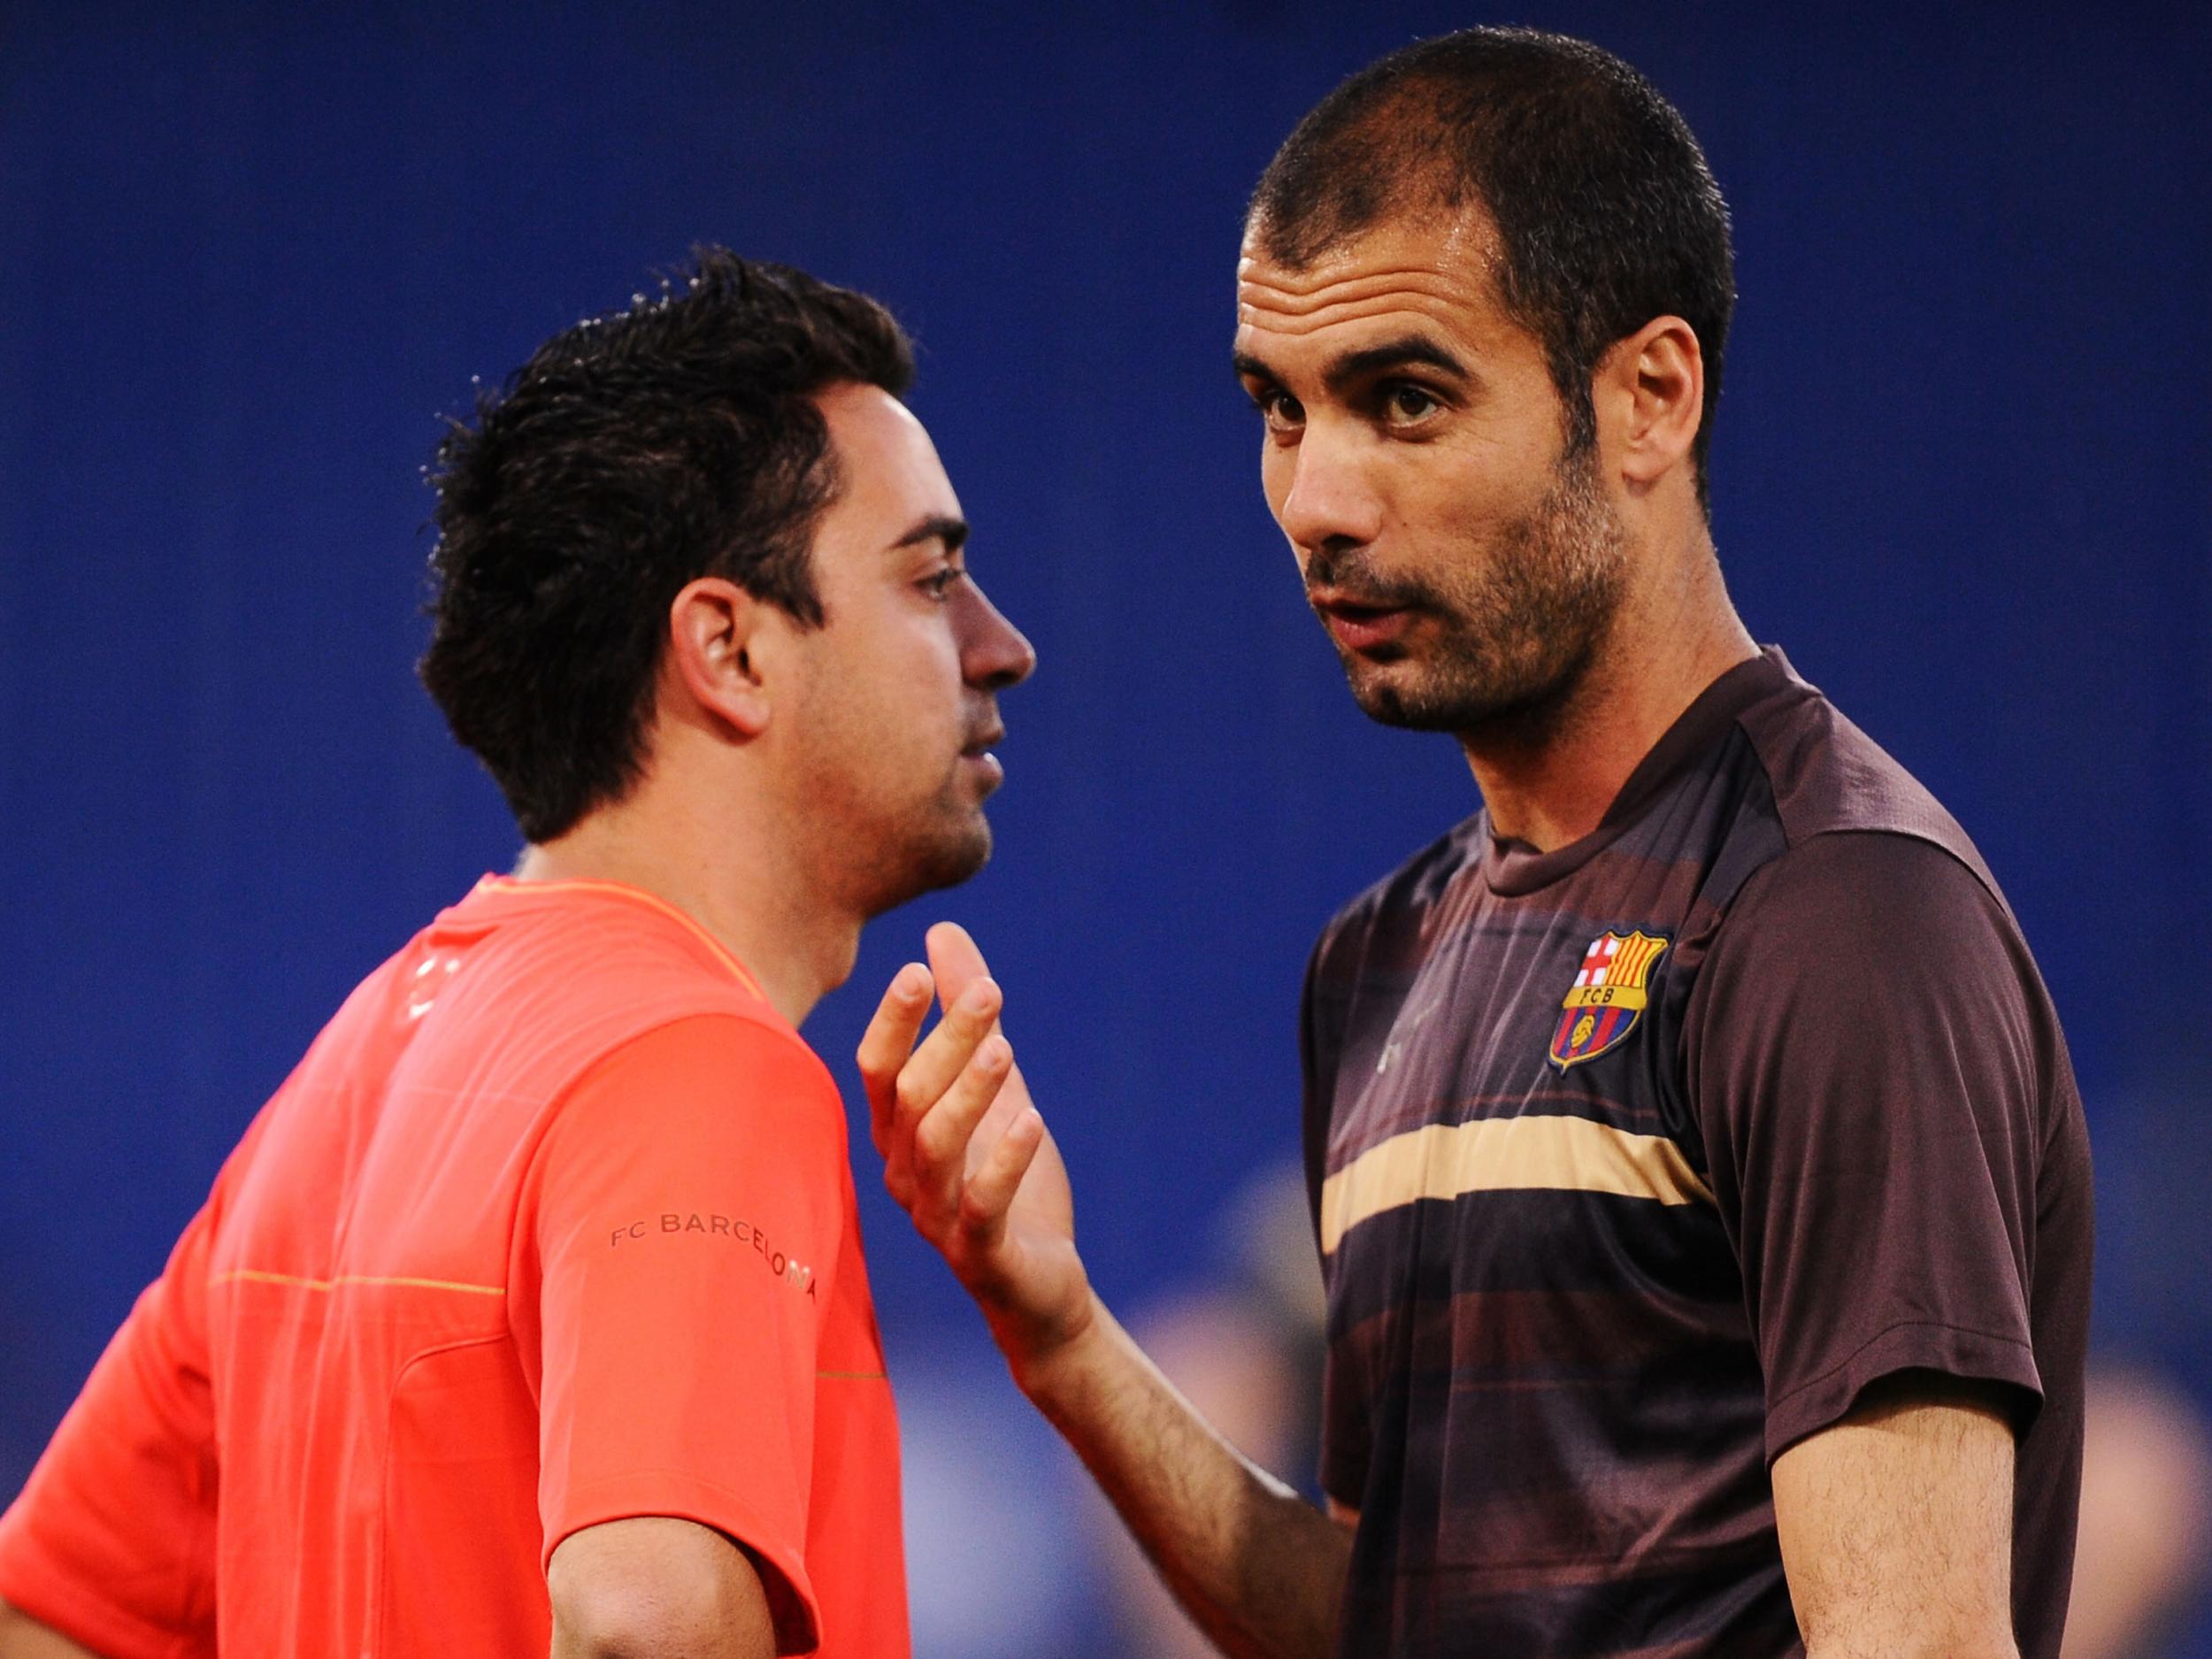 Xavi had his run-ins with Mourinho while playing under Guardiola